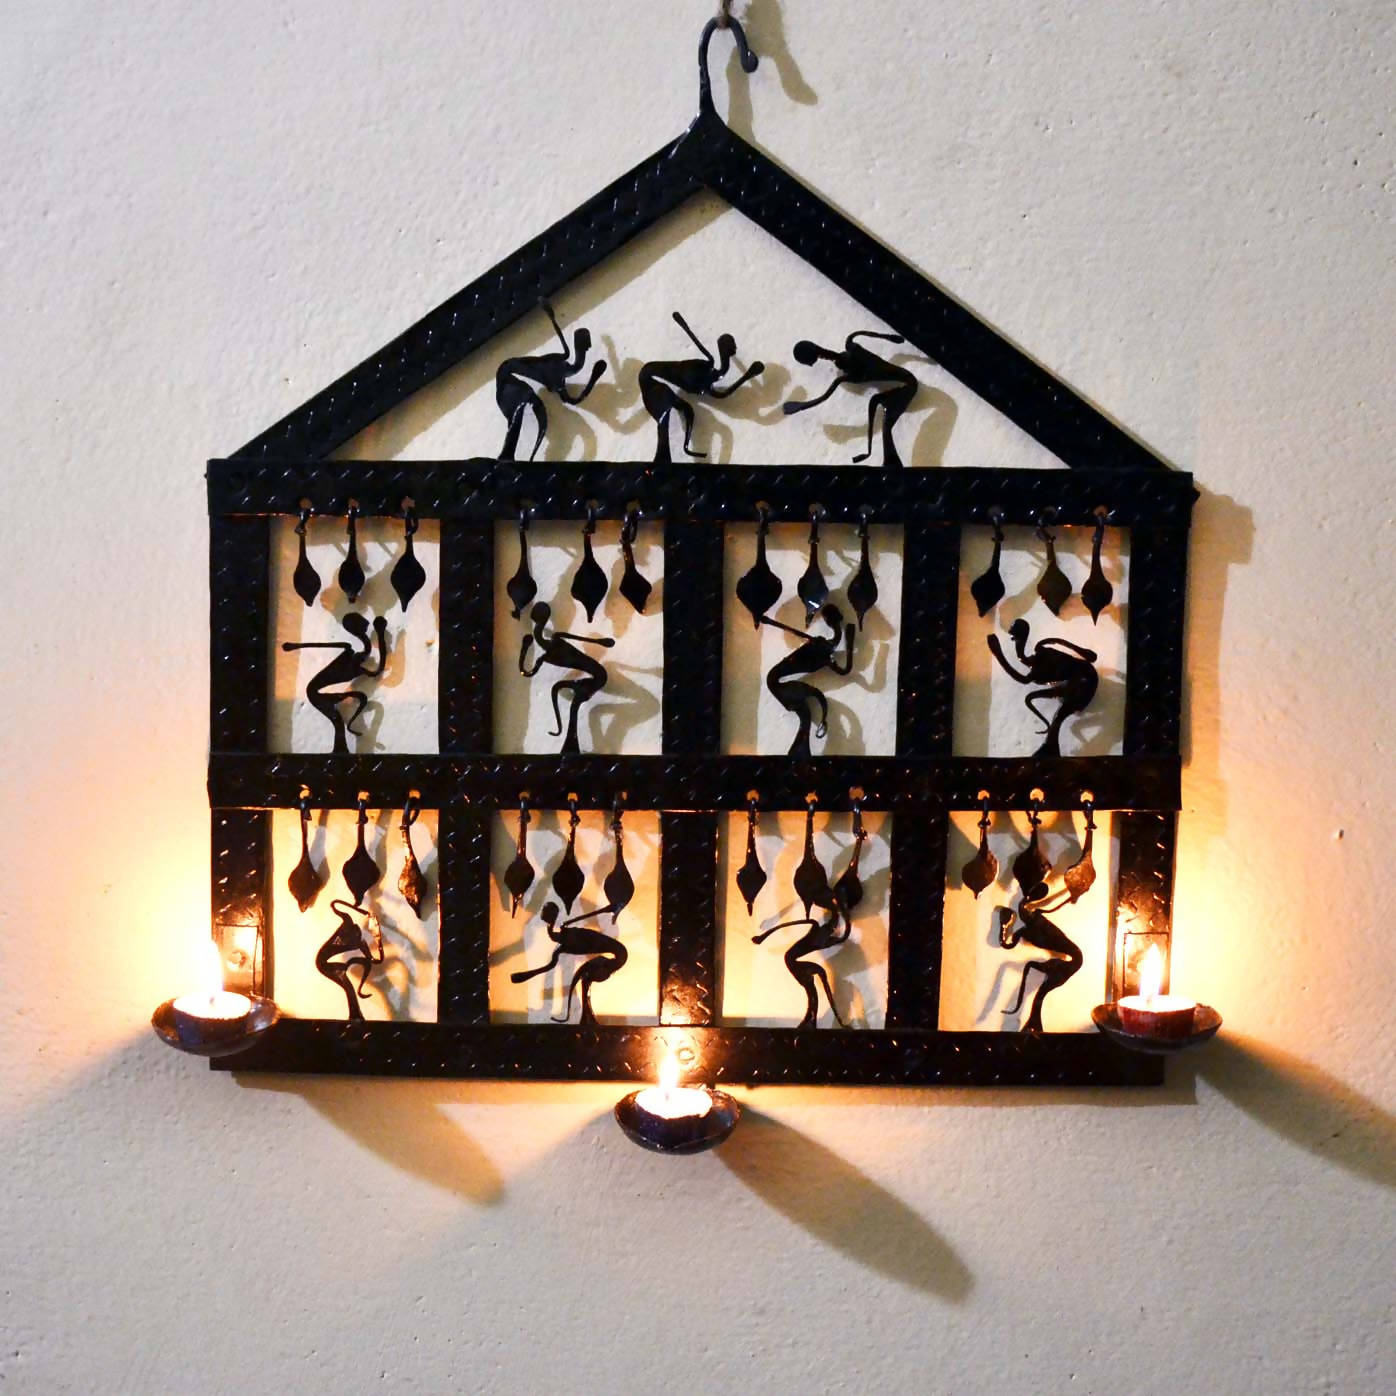 Wrought Iron Tribal Candle Holder Wall Hanging - Decor & Living - 1